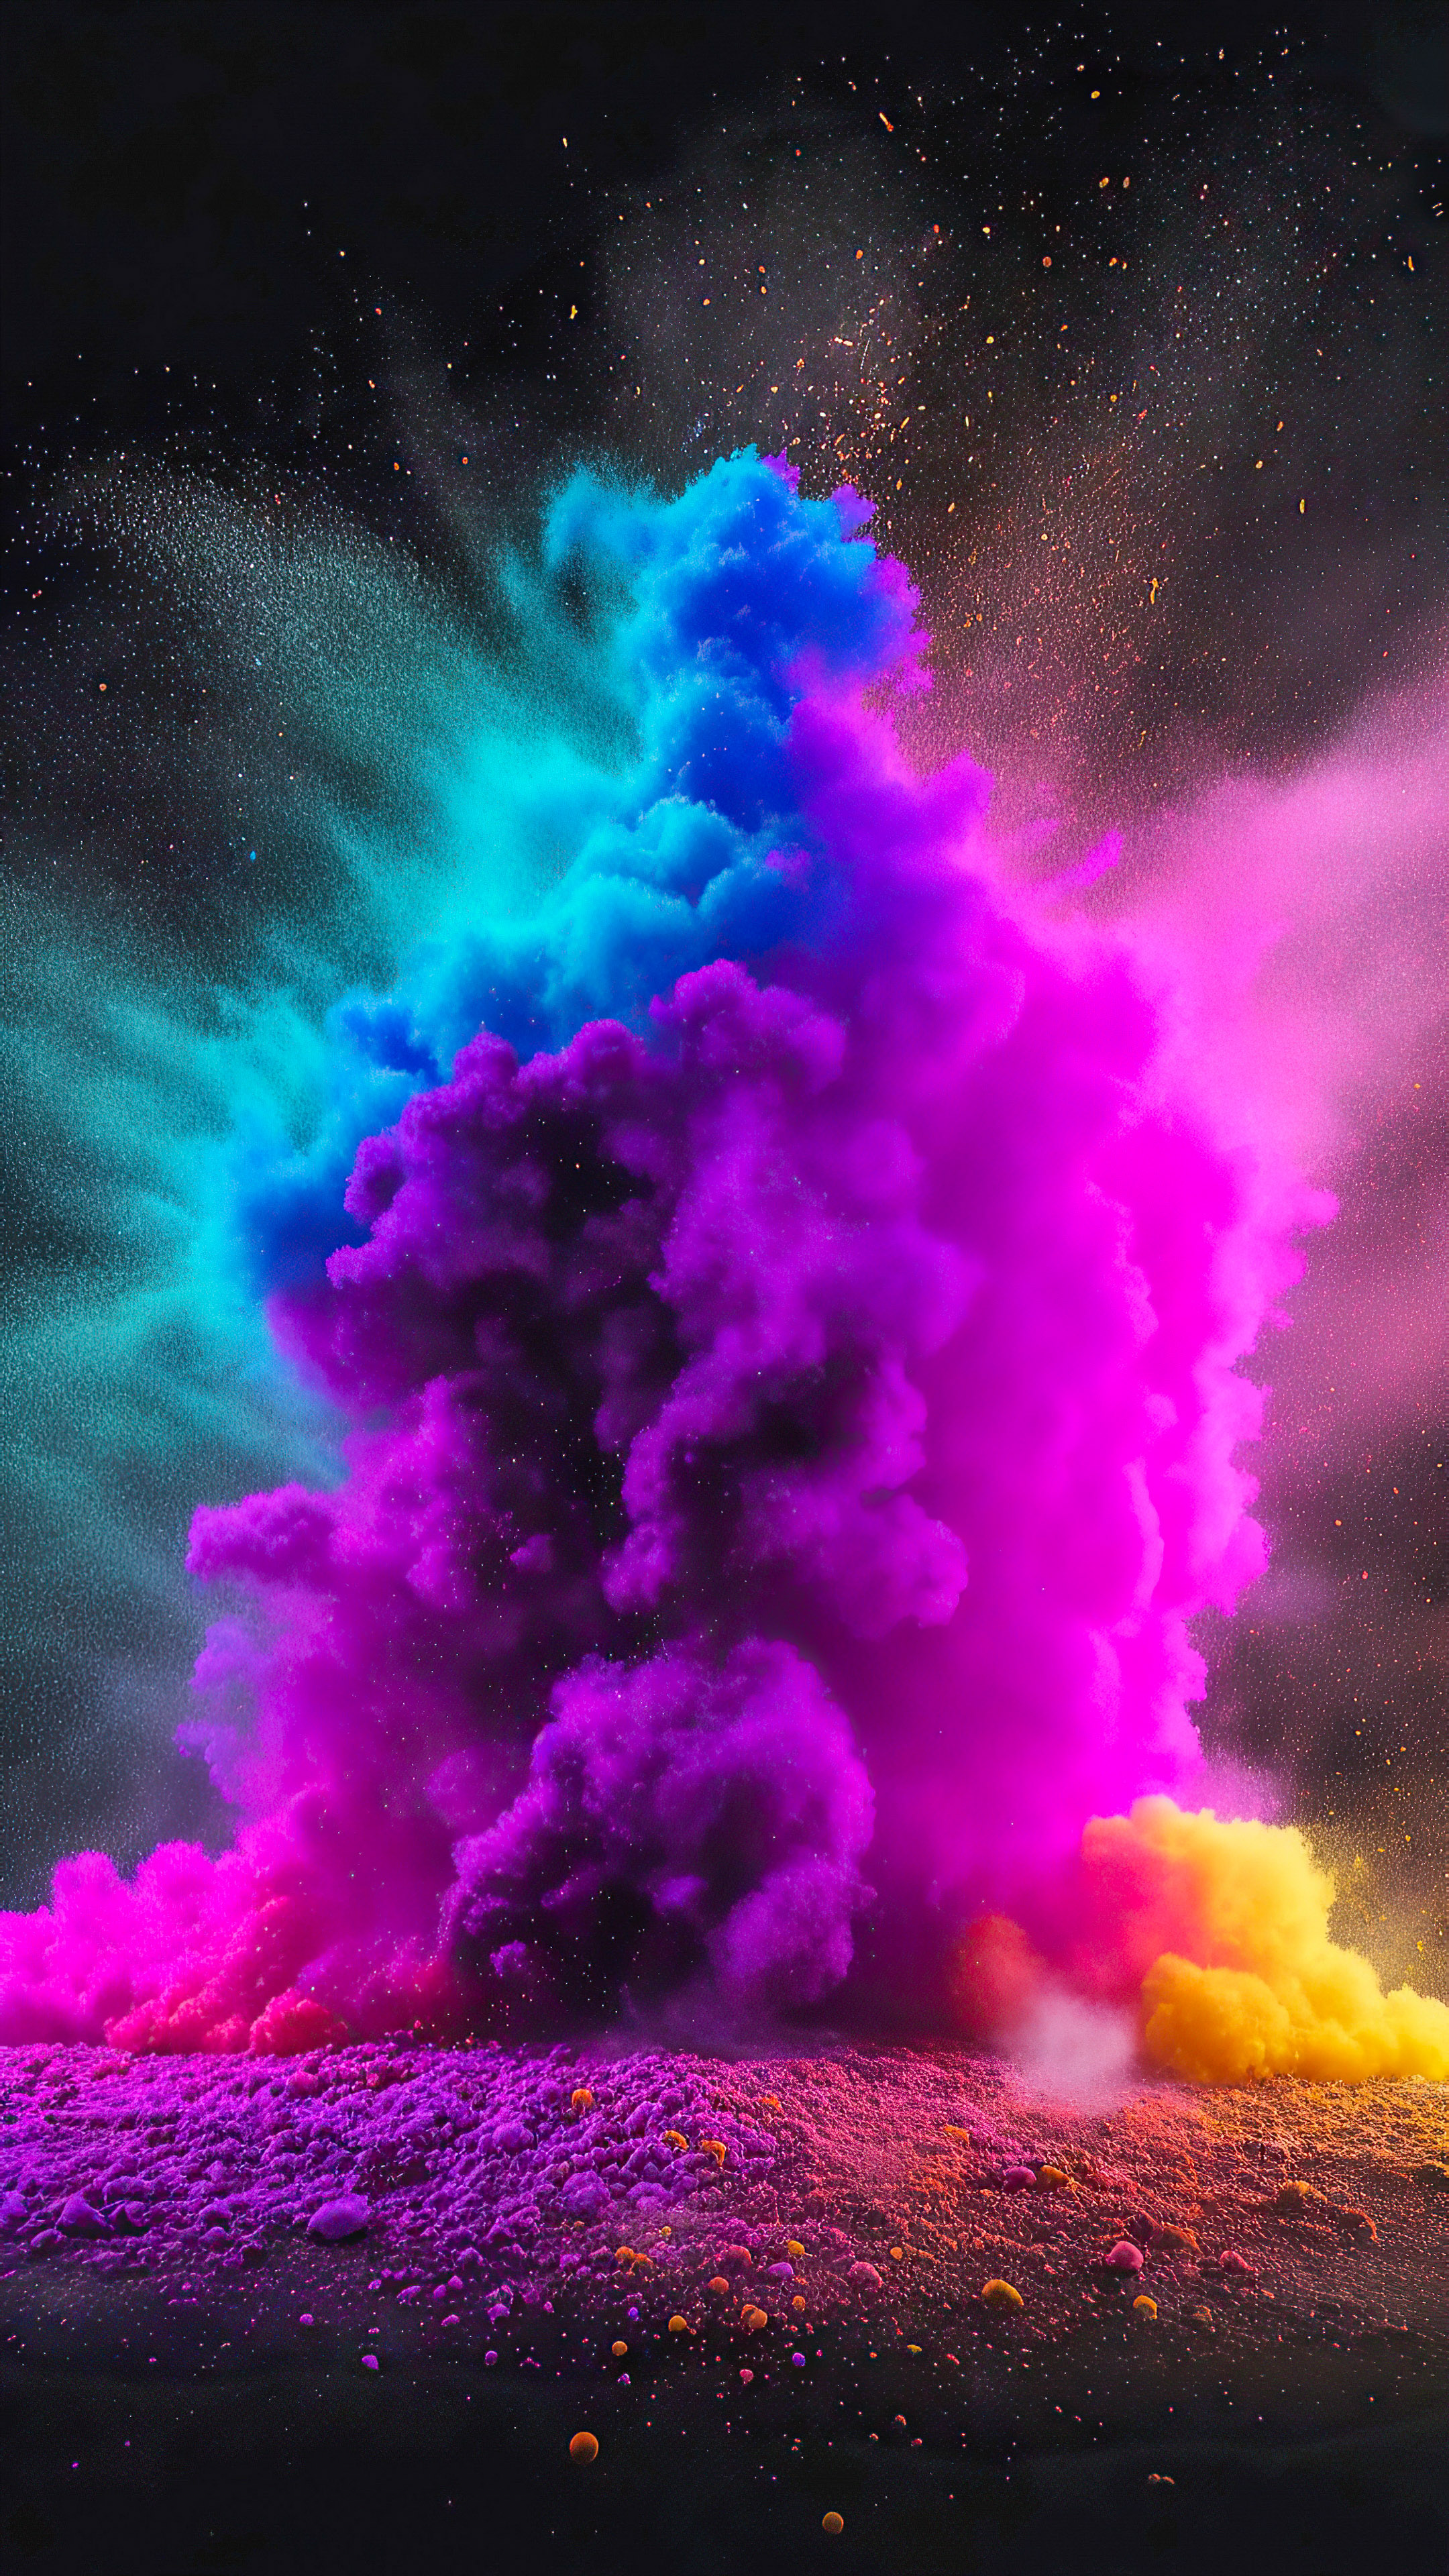 Immerse your phone in a burst of color with our dark abstract wallpaper featuring a colorful explosion of dust powder particles.